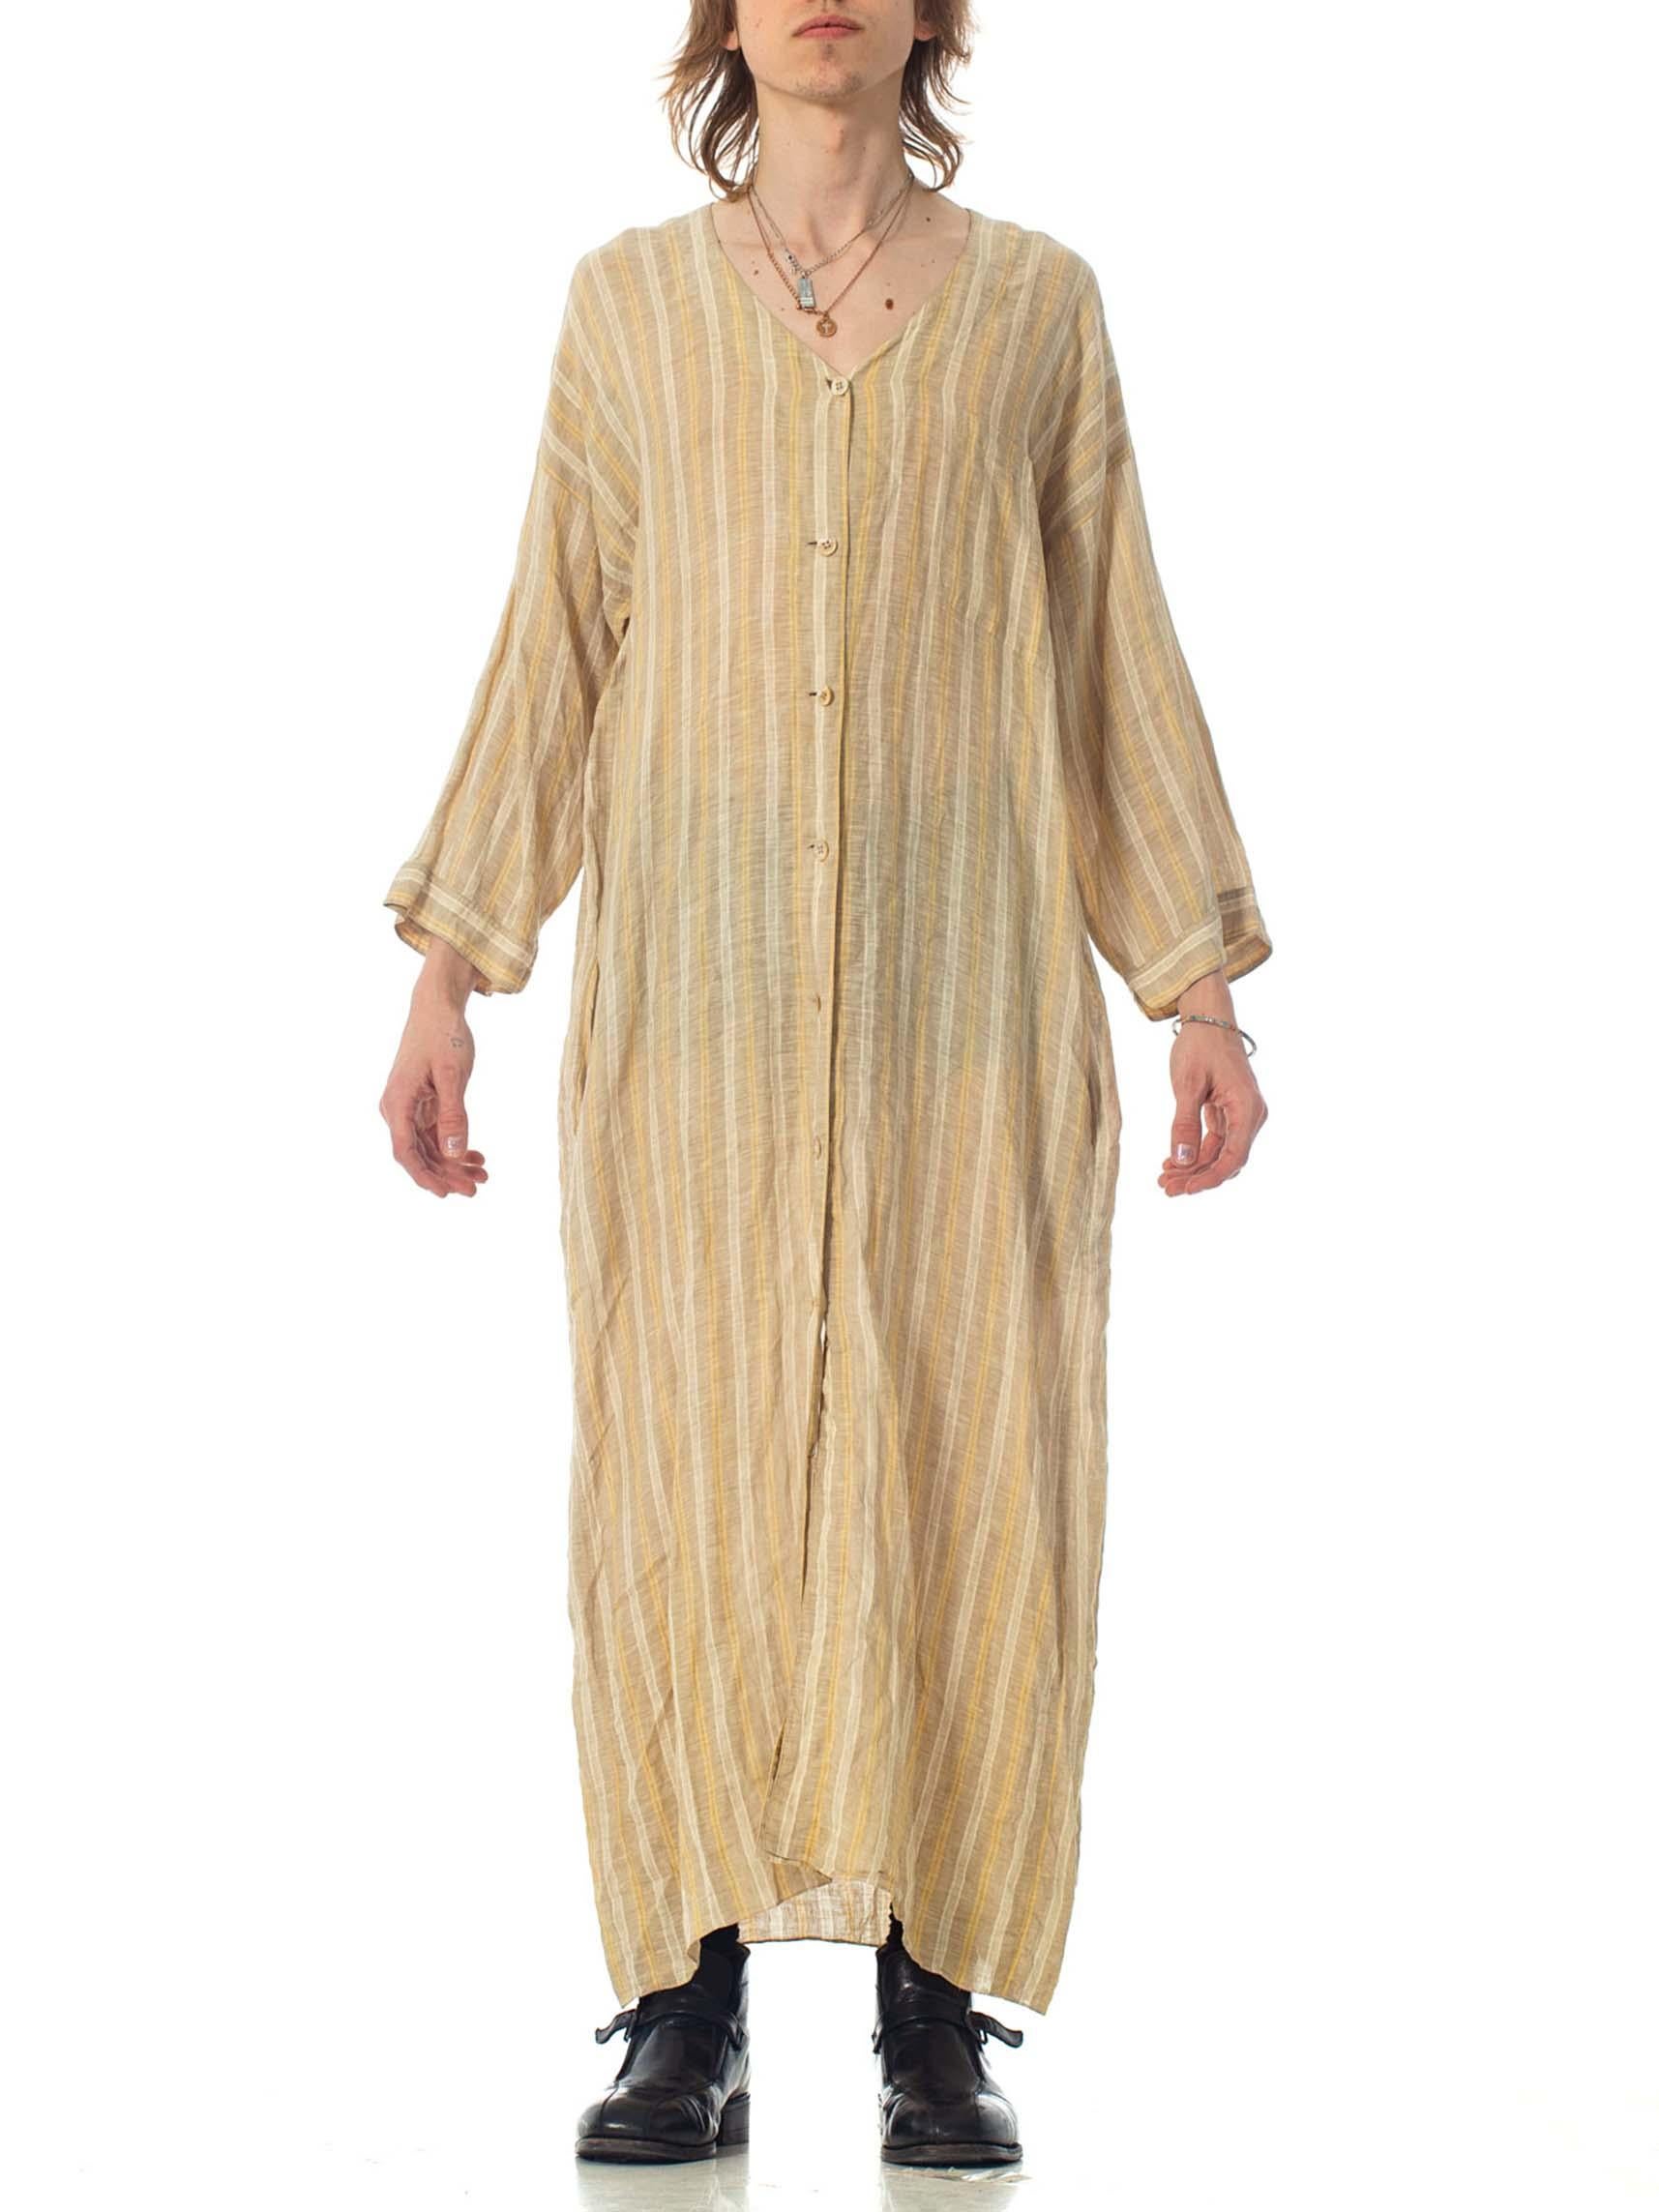 1970S ISSEY MIYAKE STYLE- Style Beige & White Cotton Blend Tunic Duster In Excellent Condition For Sale In New York, NY